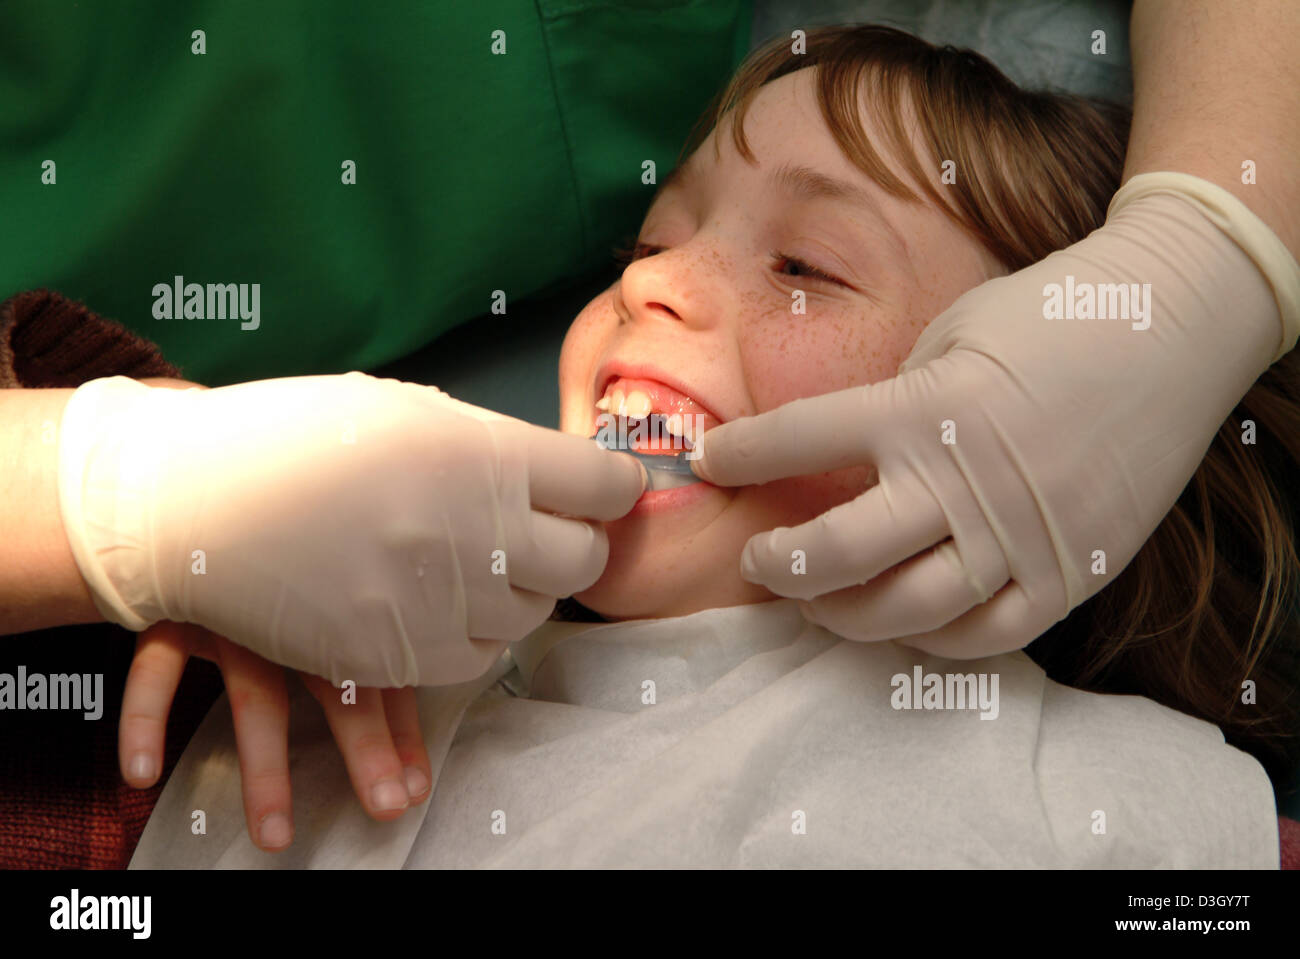 CHILD RECEIVING DENTAL CARE Stock Photo